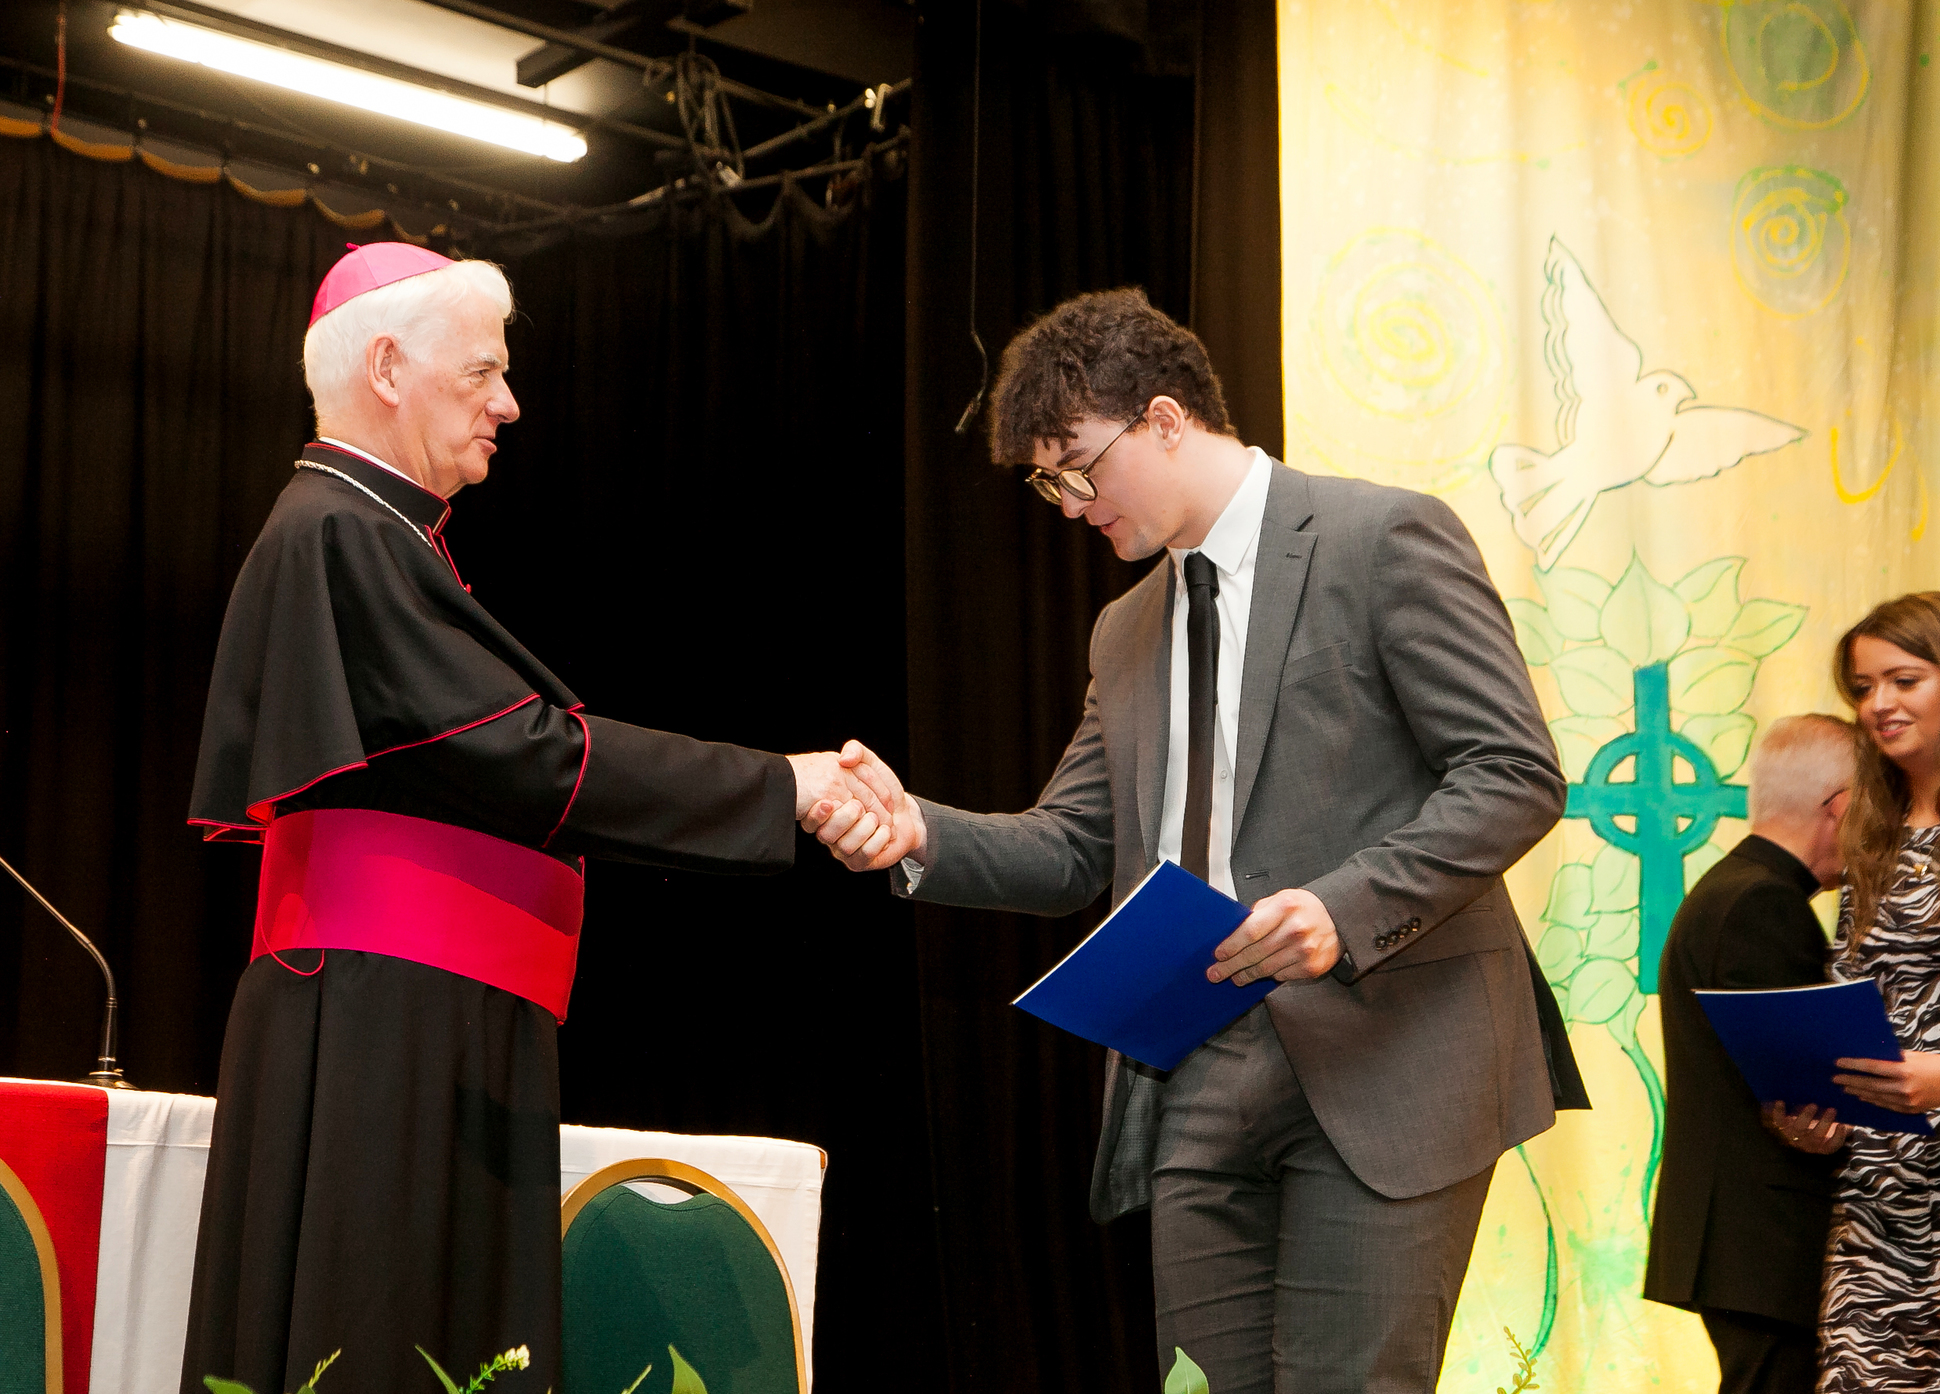 The Most Rev Noel Treanor, Bishop of Down and Connor and Chair of St Mary’s Governing Body, presents Conall Stott with his Certificate in Religious Education